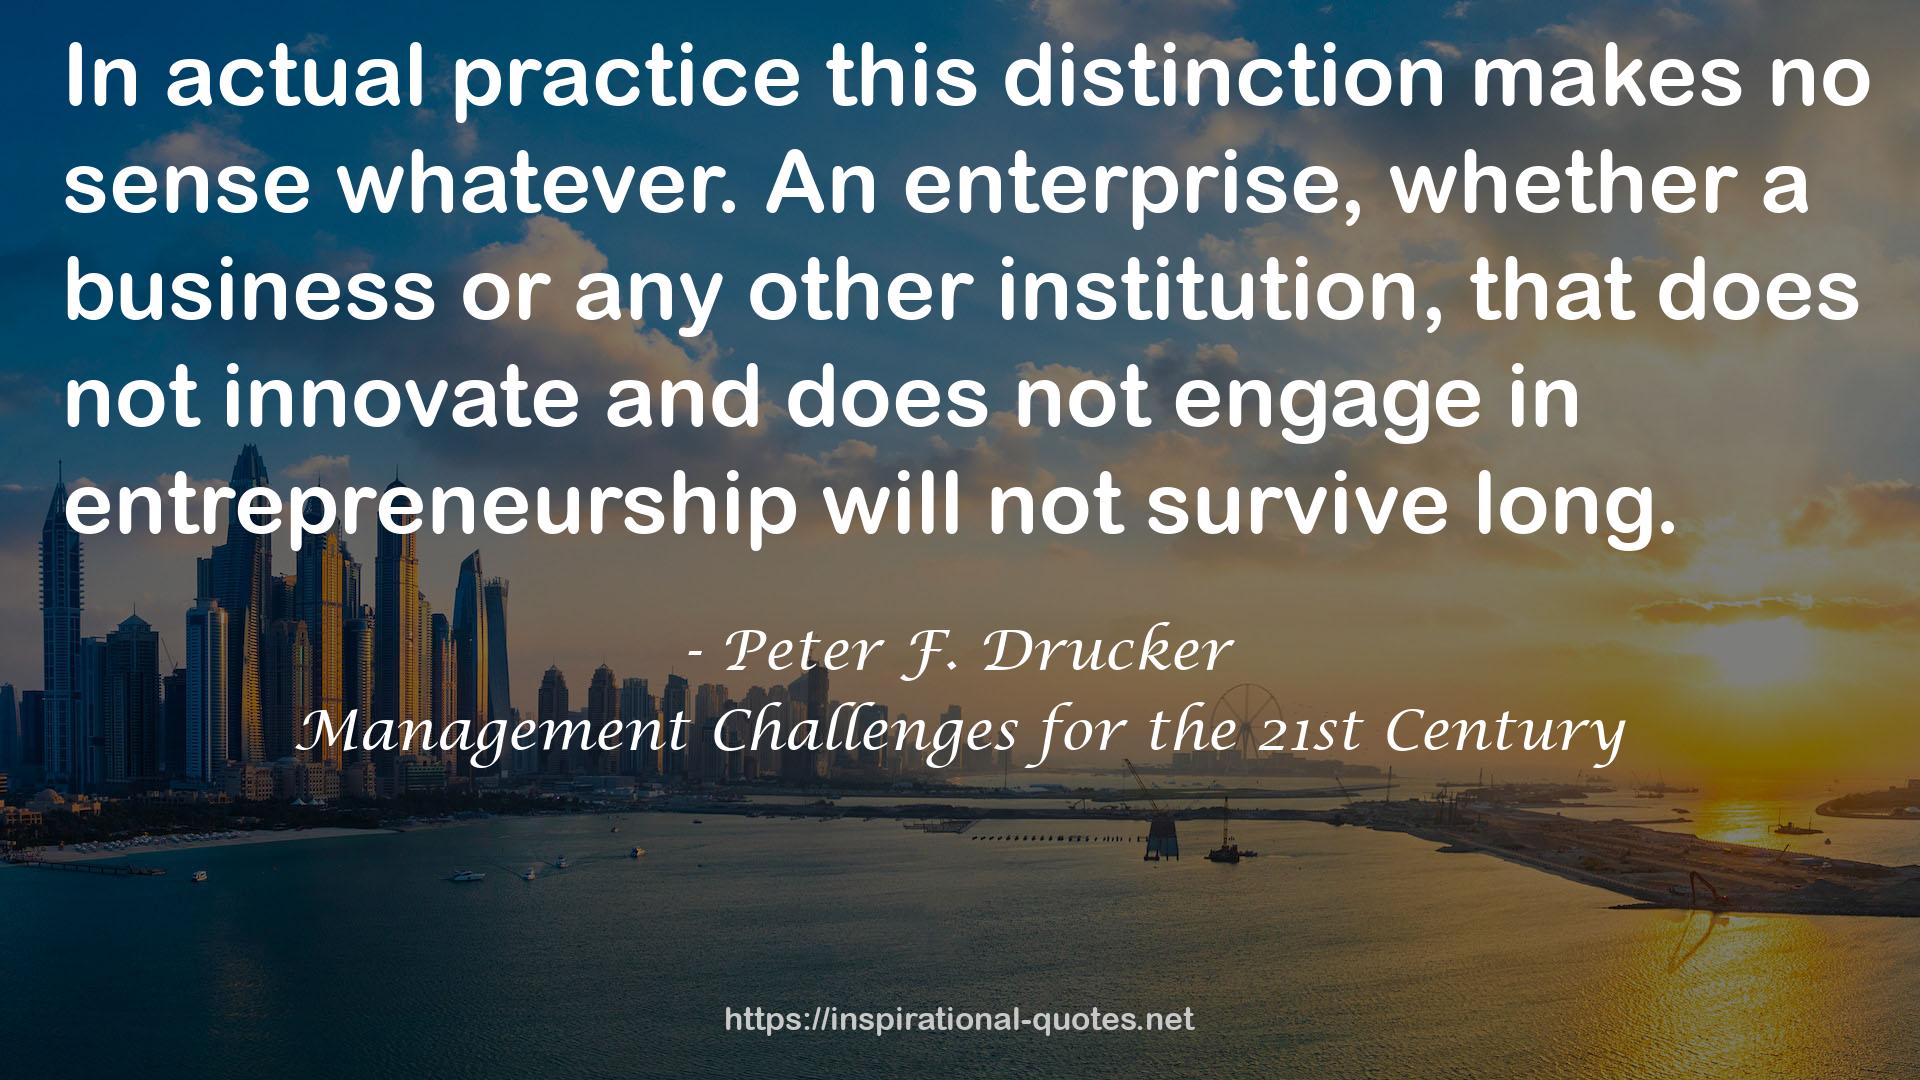 Management Challenges for the 21st Century QUOTES